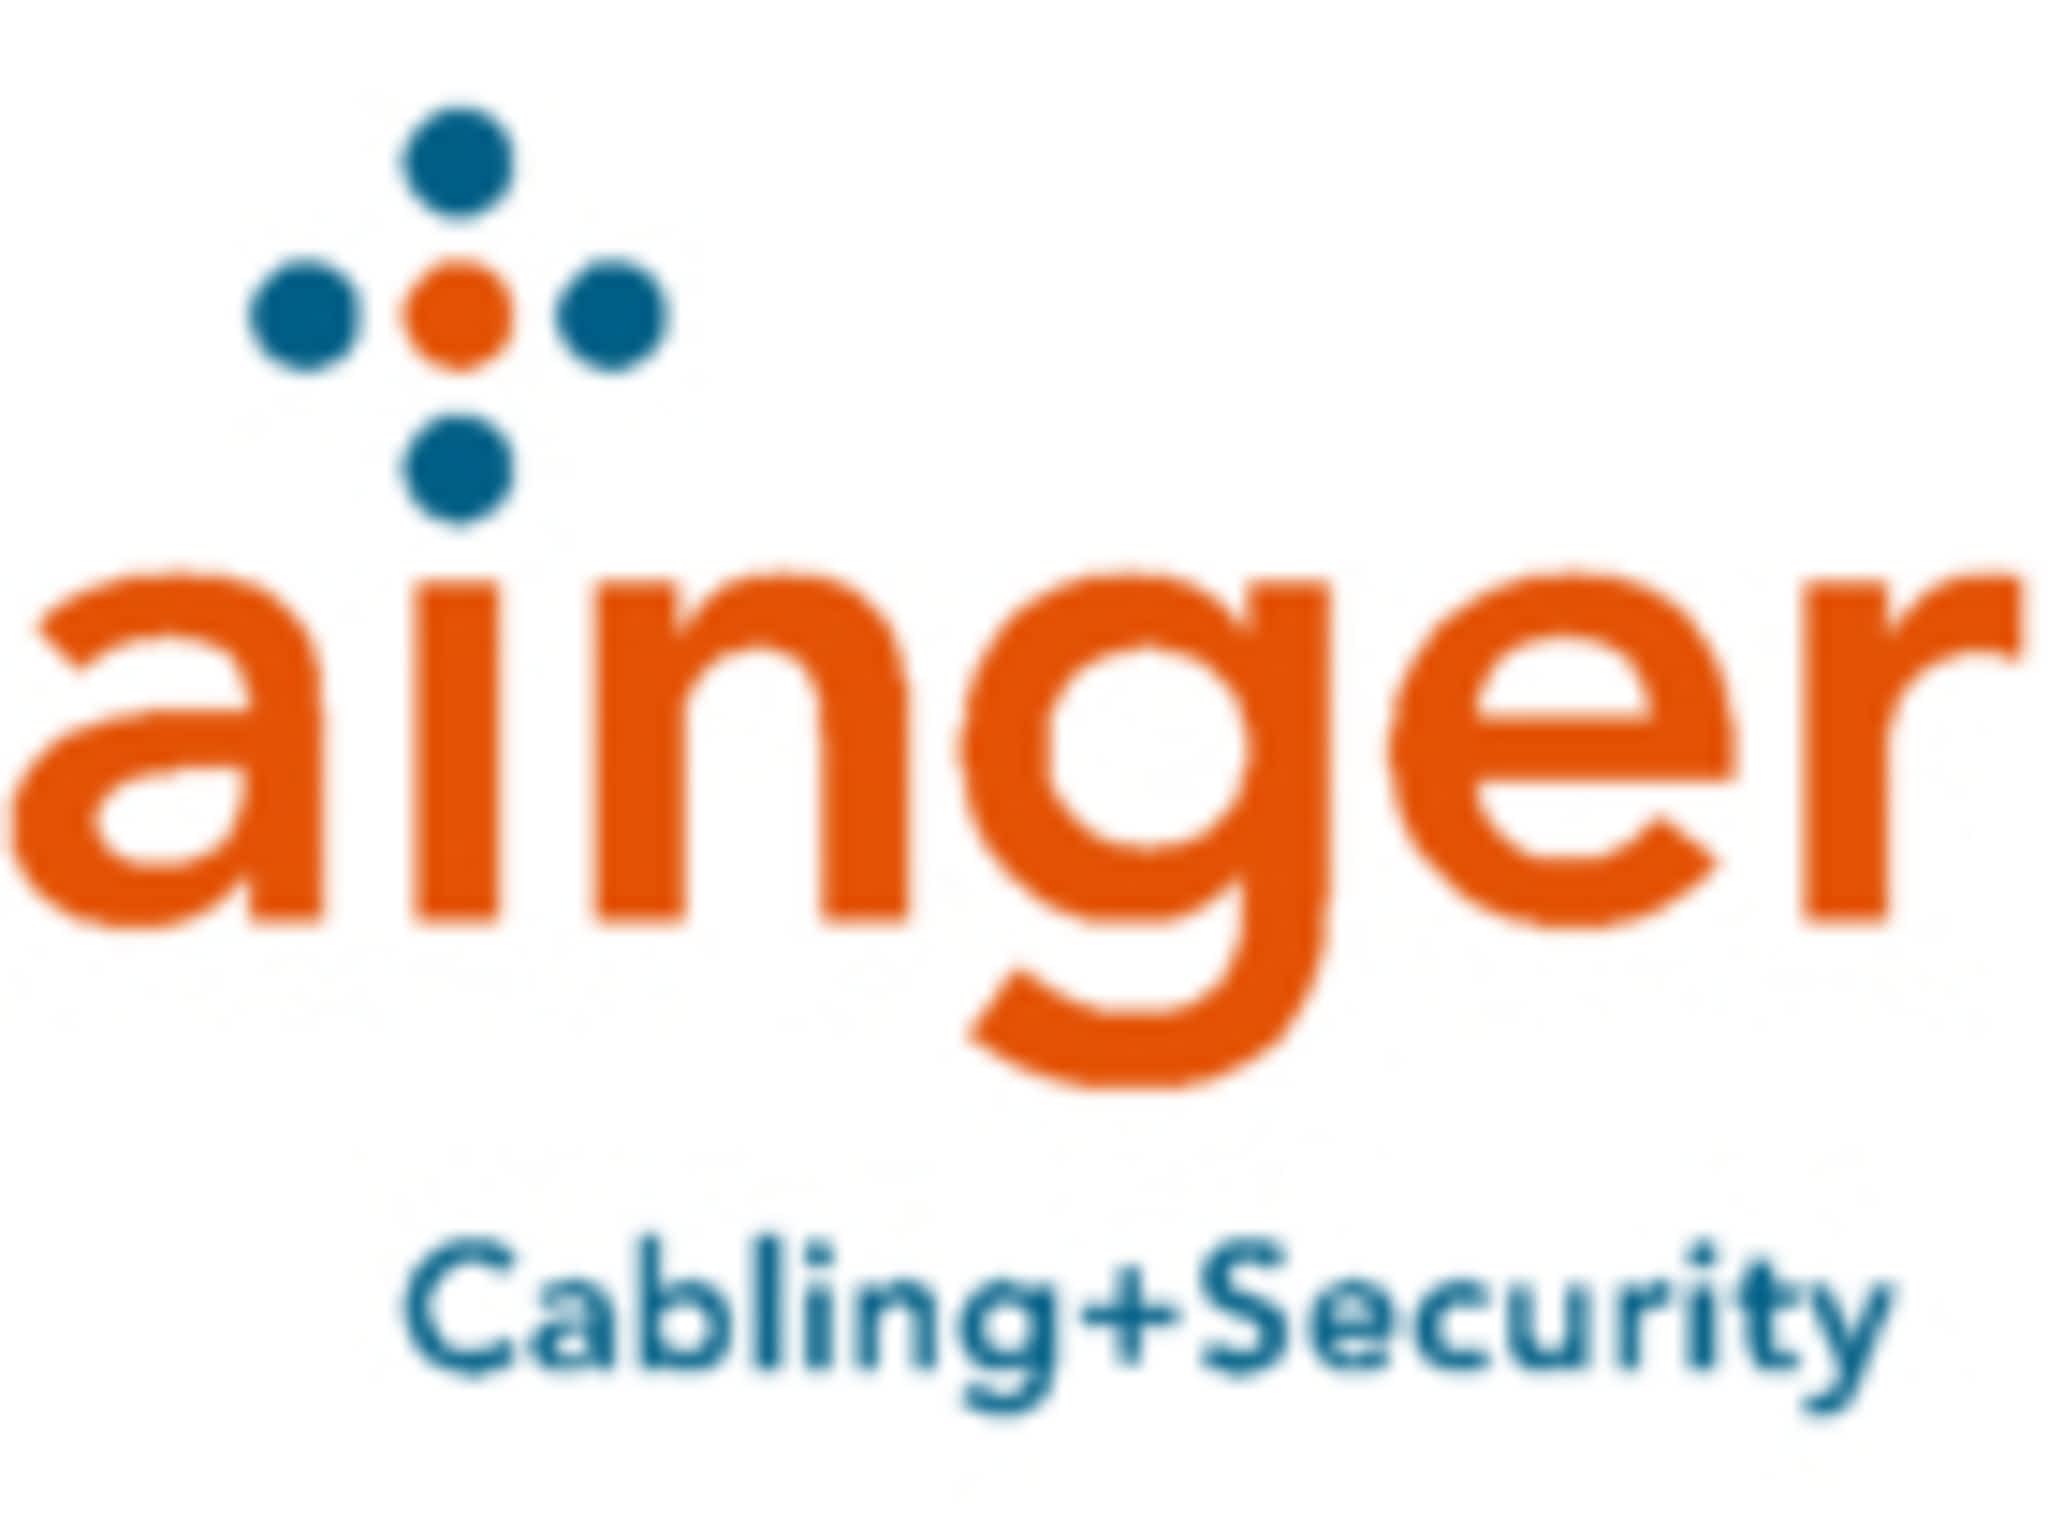 photo Ainger Cabling + Security